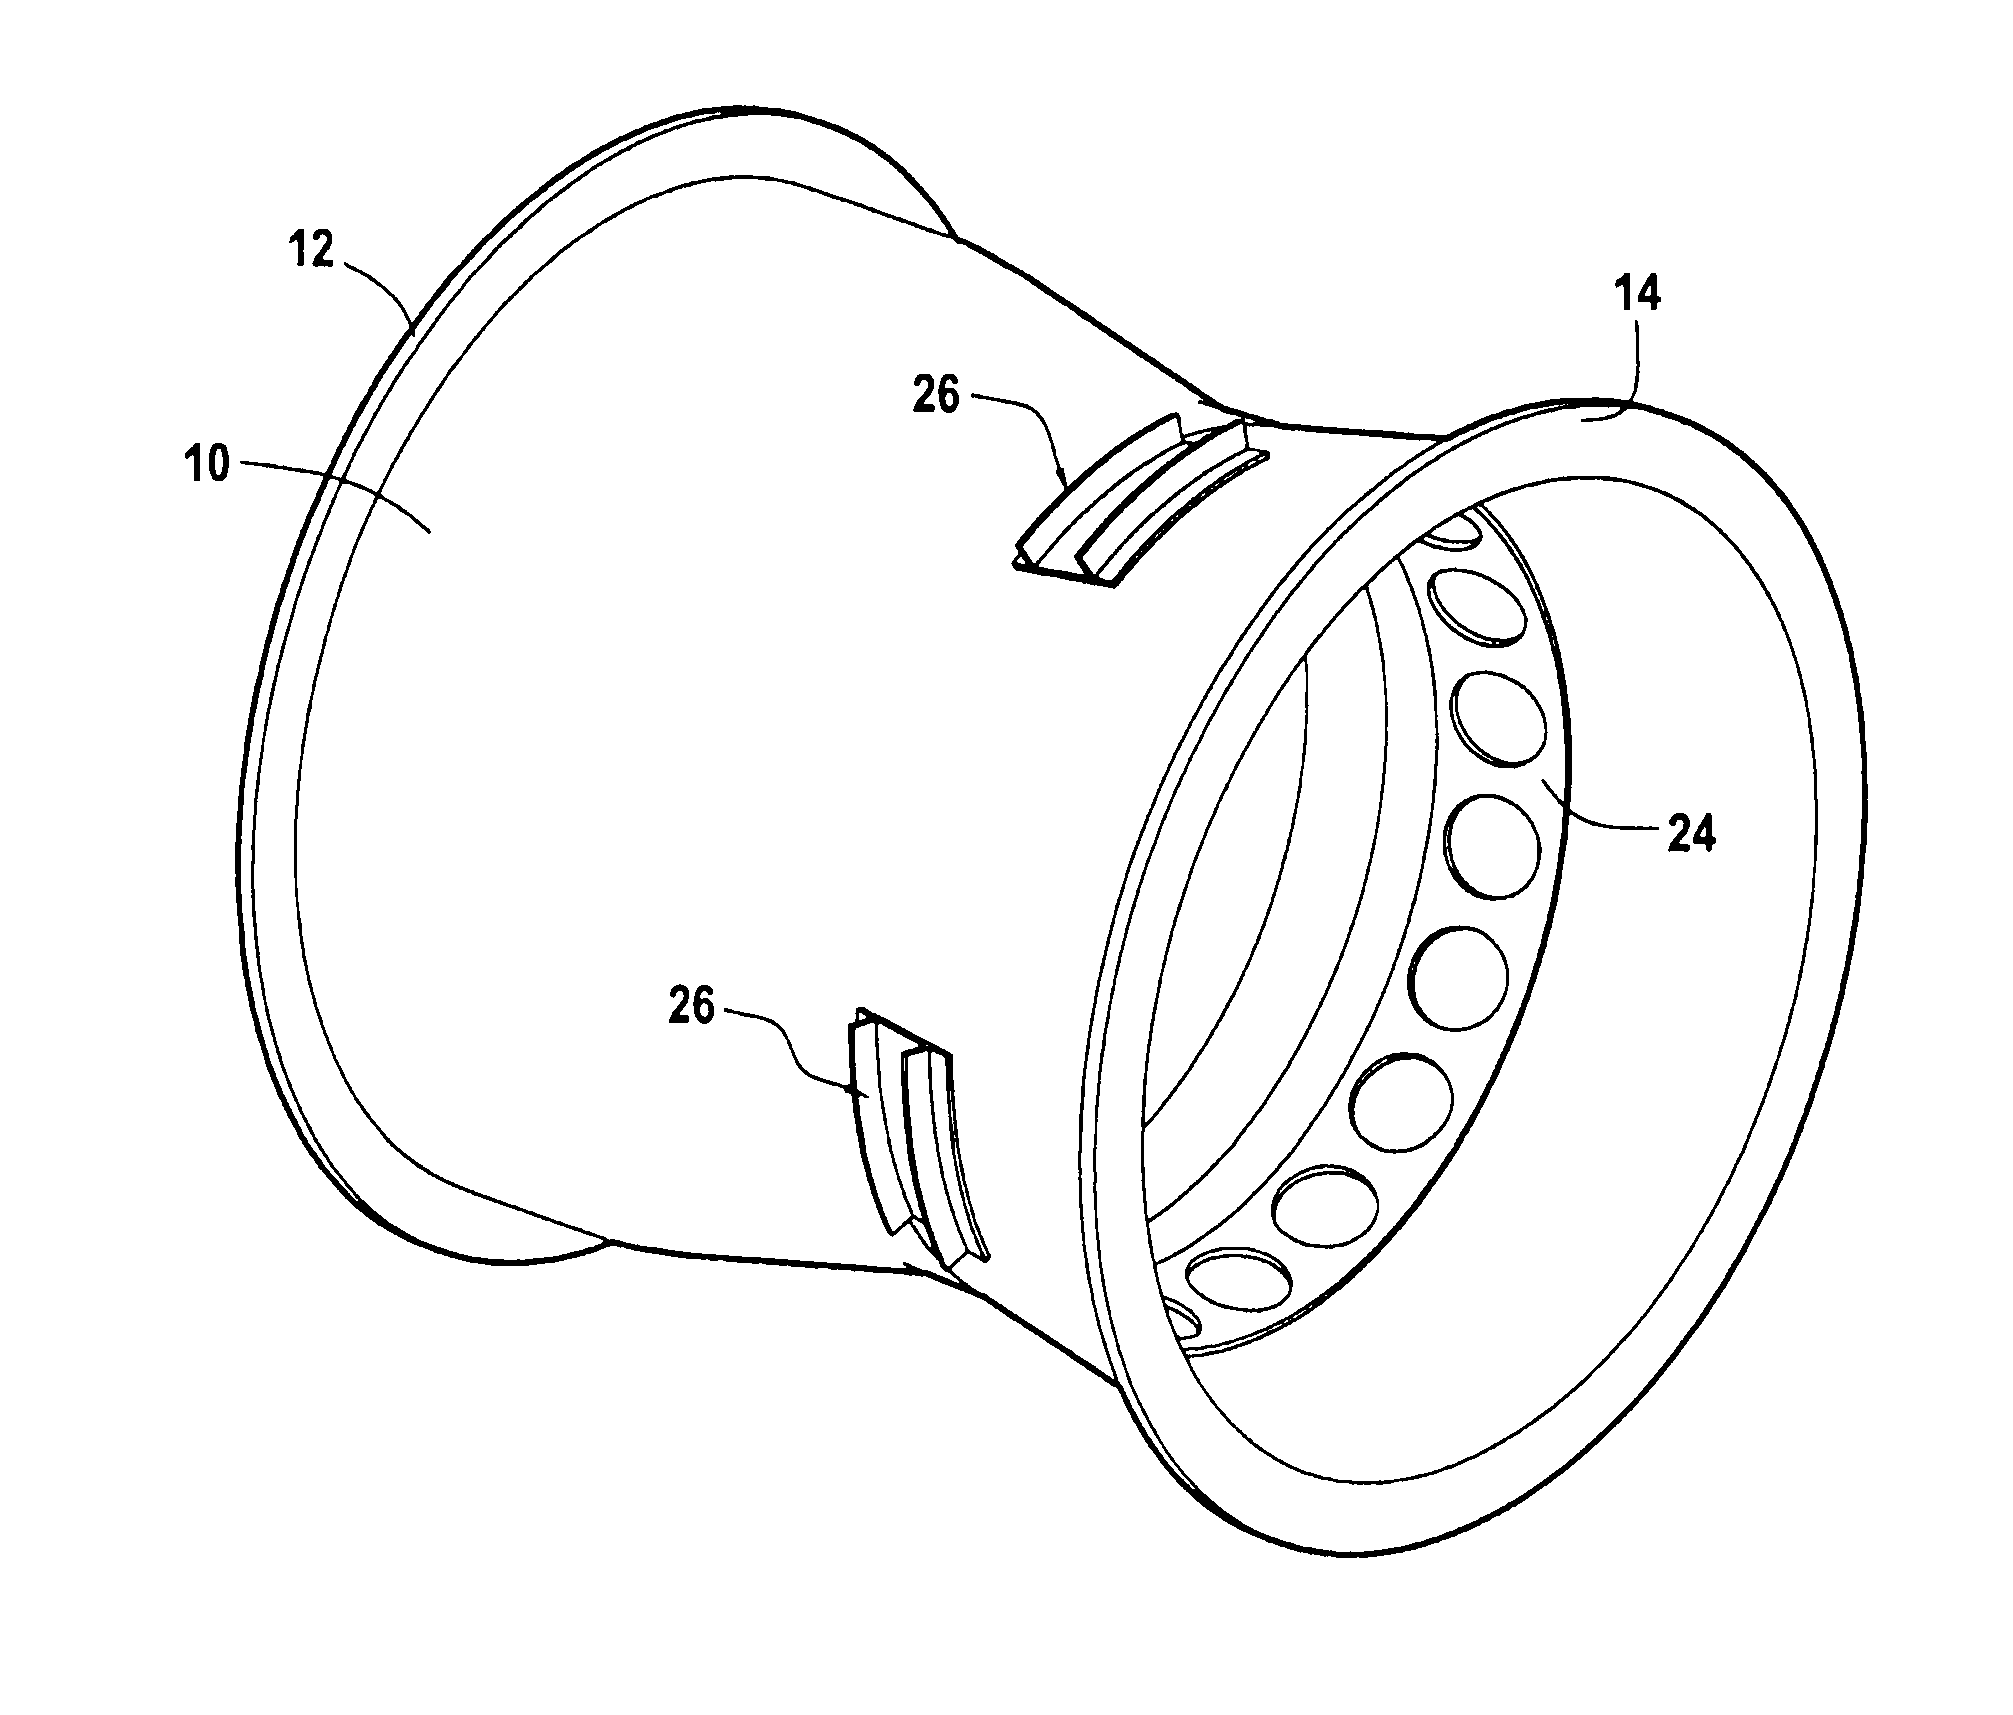 Aeroengine fan casing made of composite material, and a method of fabricating it